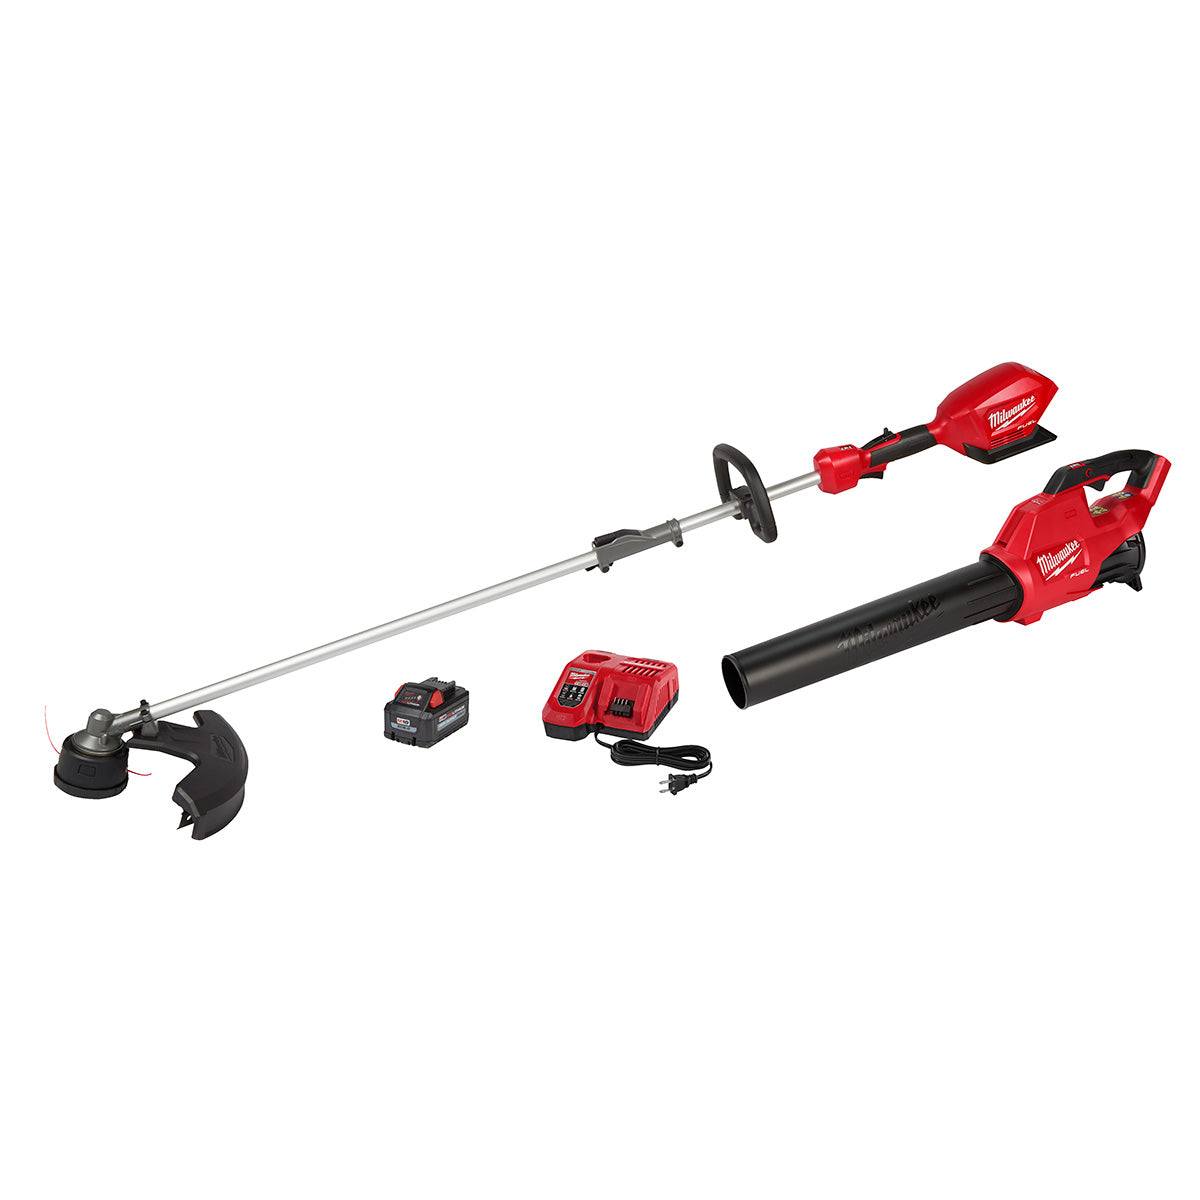 Milwaukee  3000-21  -  M18-QUIK LOK String Trimmer and Blower Combo Kit